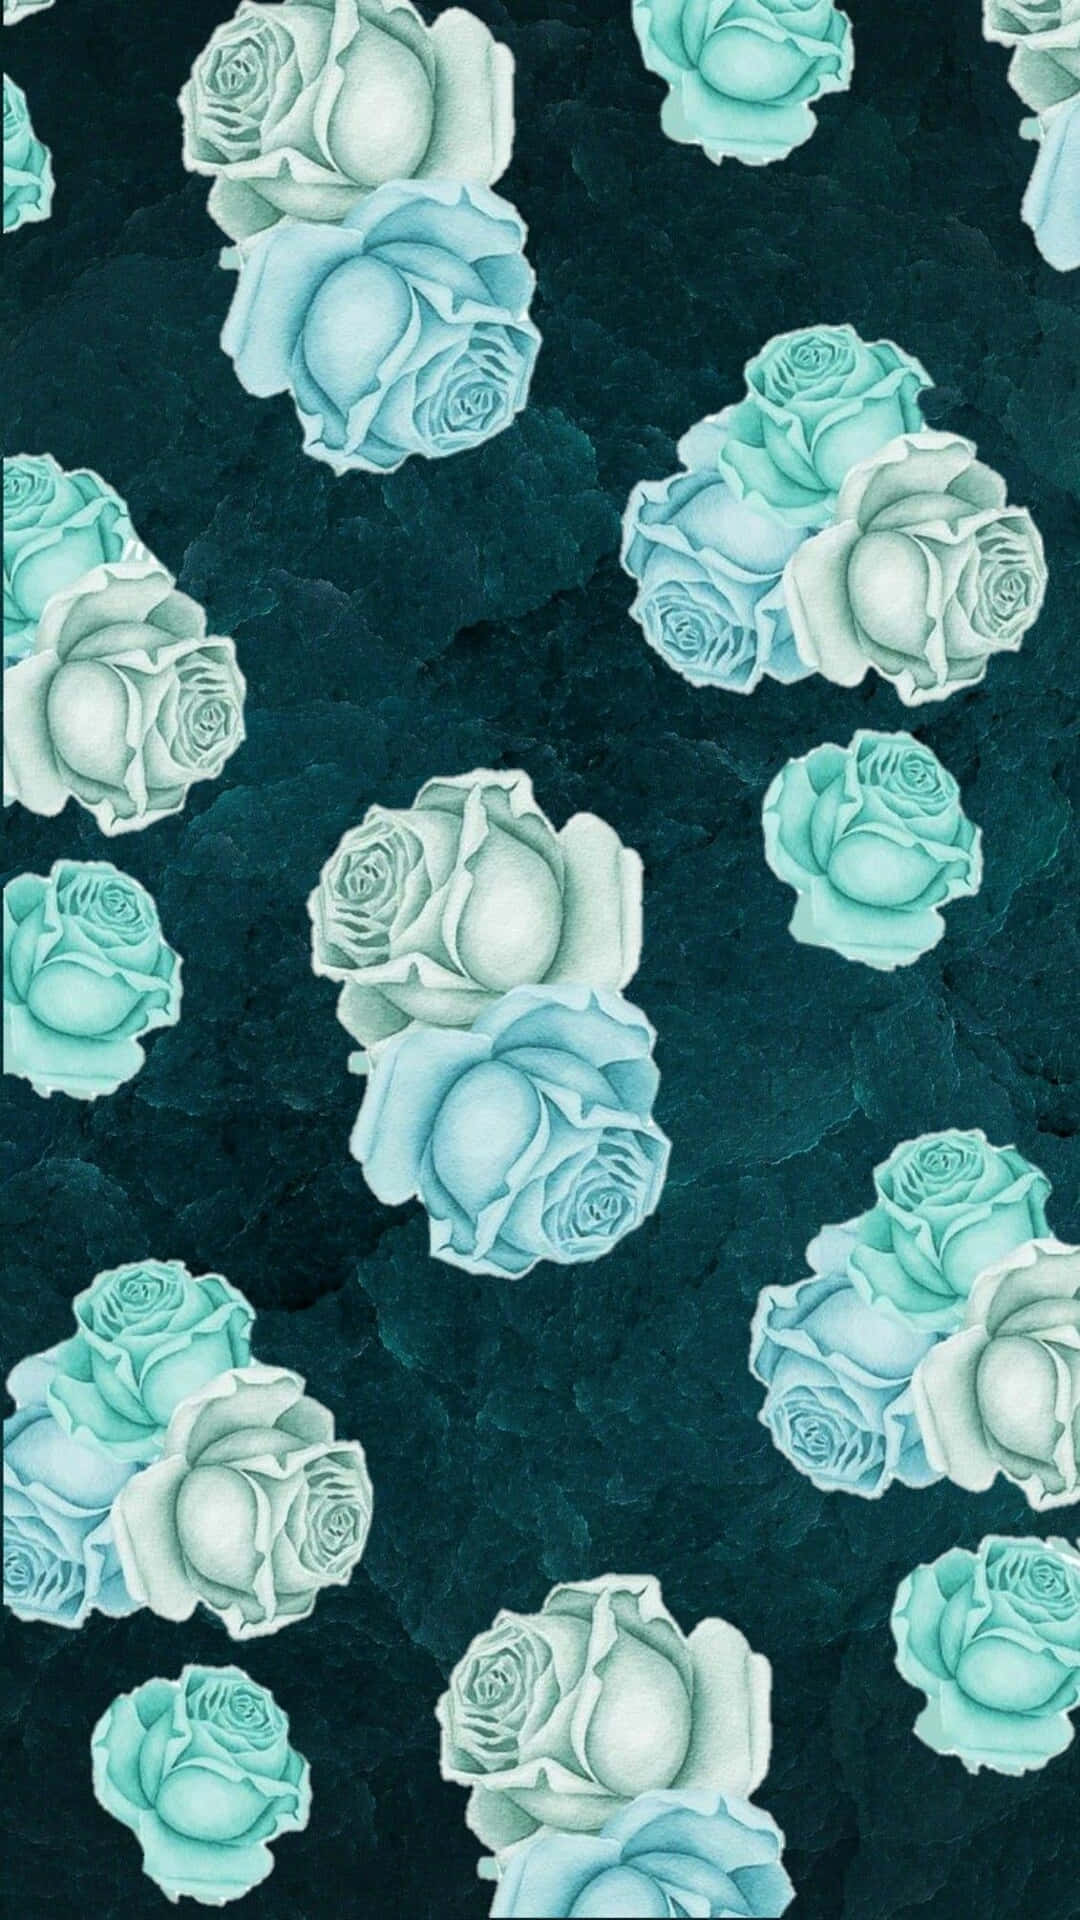 "A Vibrant Teal Flower Gently Blooms" Wallpaper